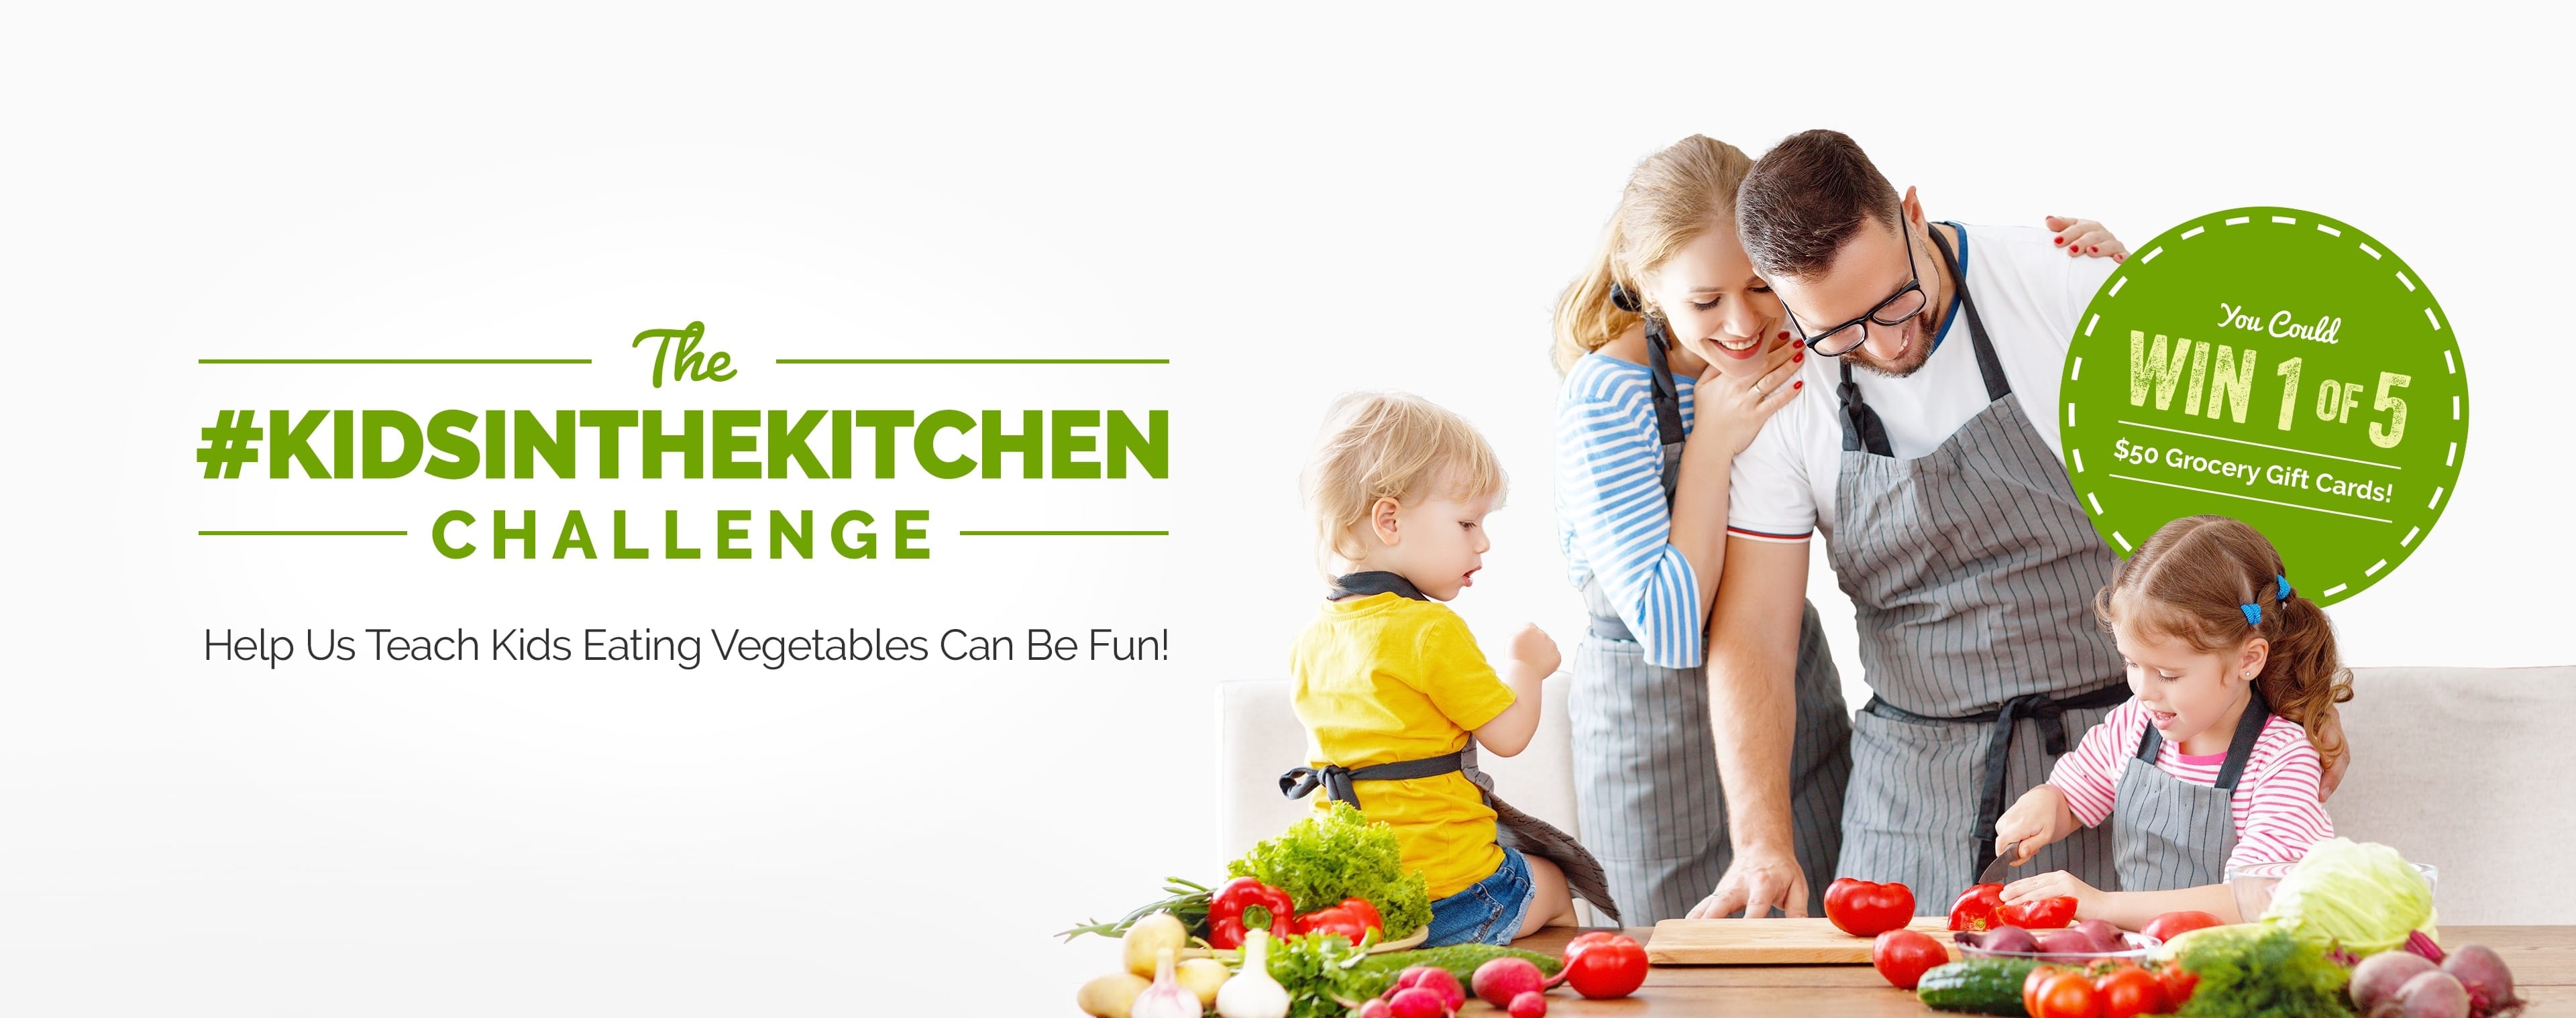 The #Kidsinthekitchen challenge. Help us teach kids eating vegetables can be fun! You could win 1 of 5 %50 grocery gift cards!